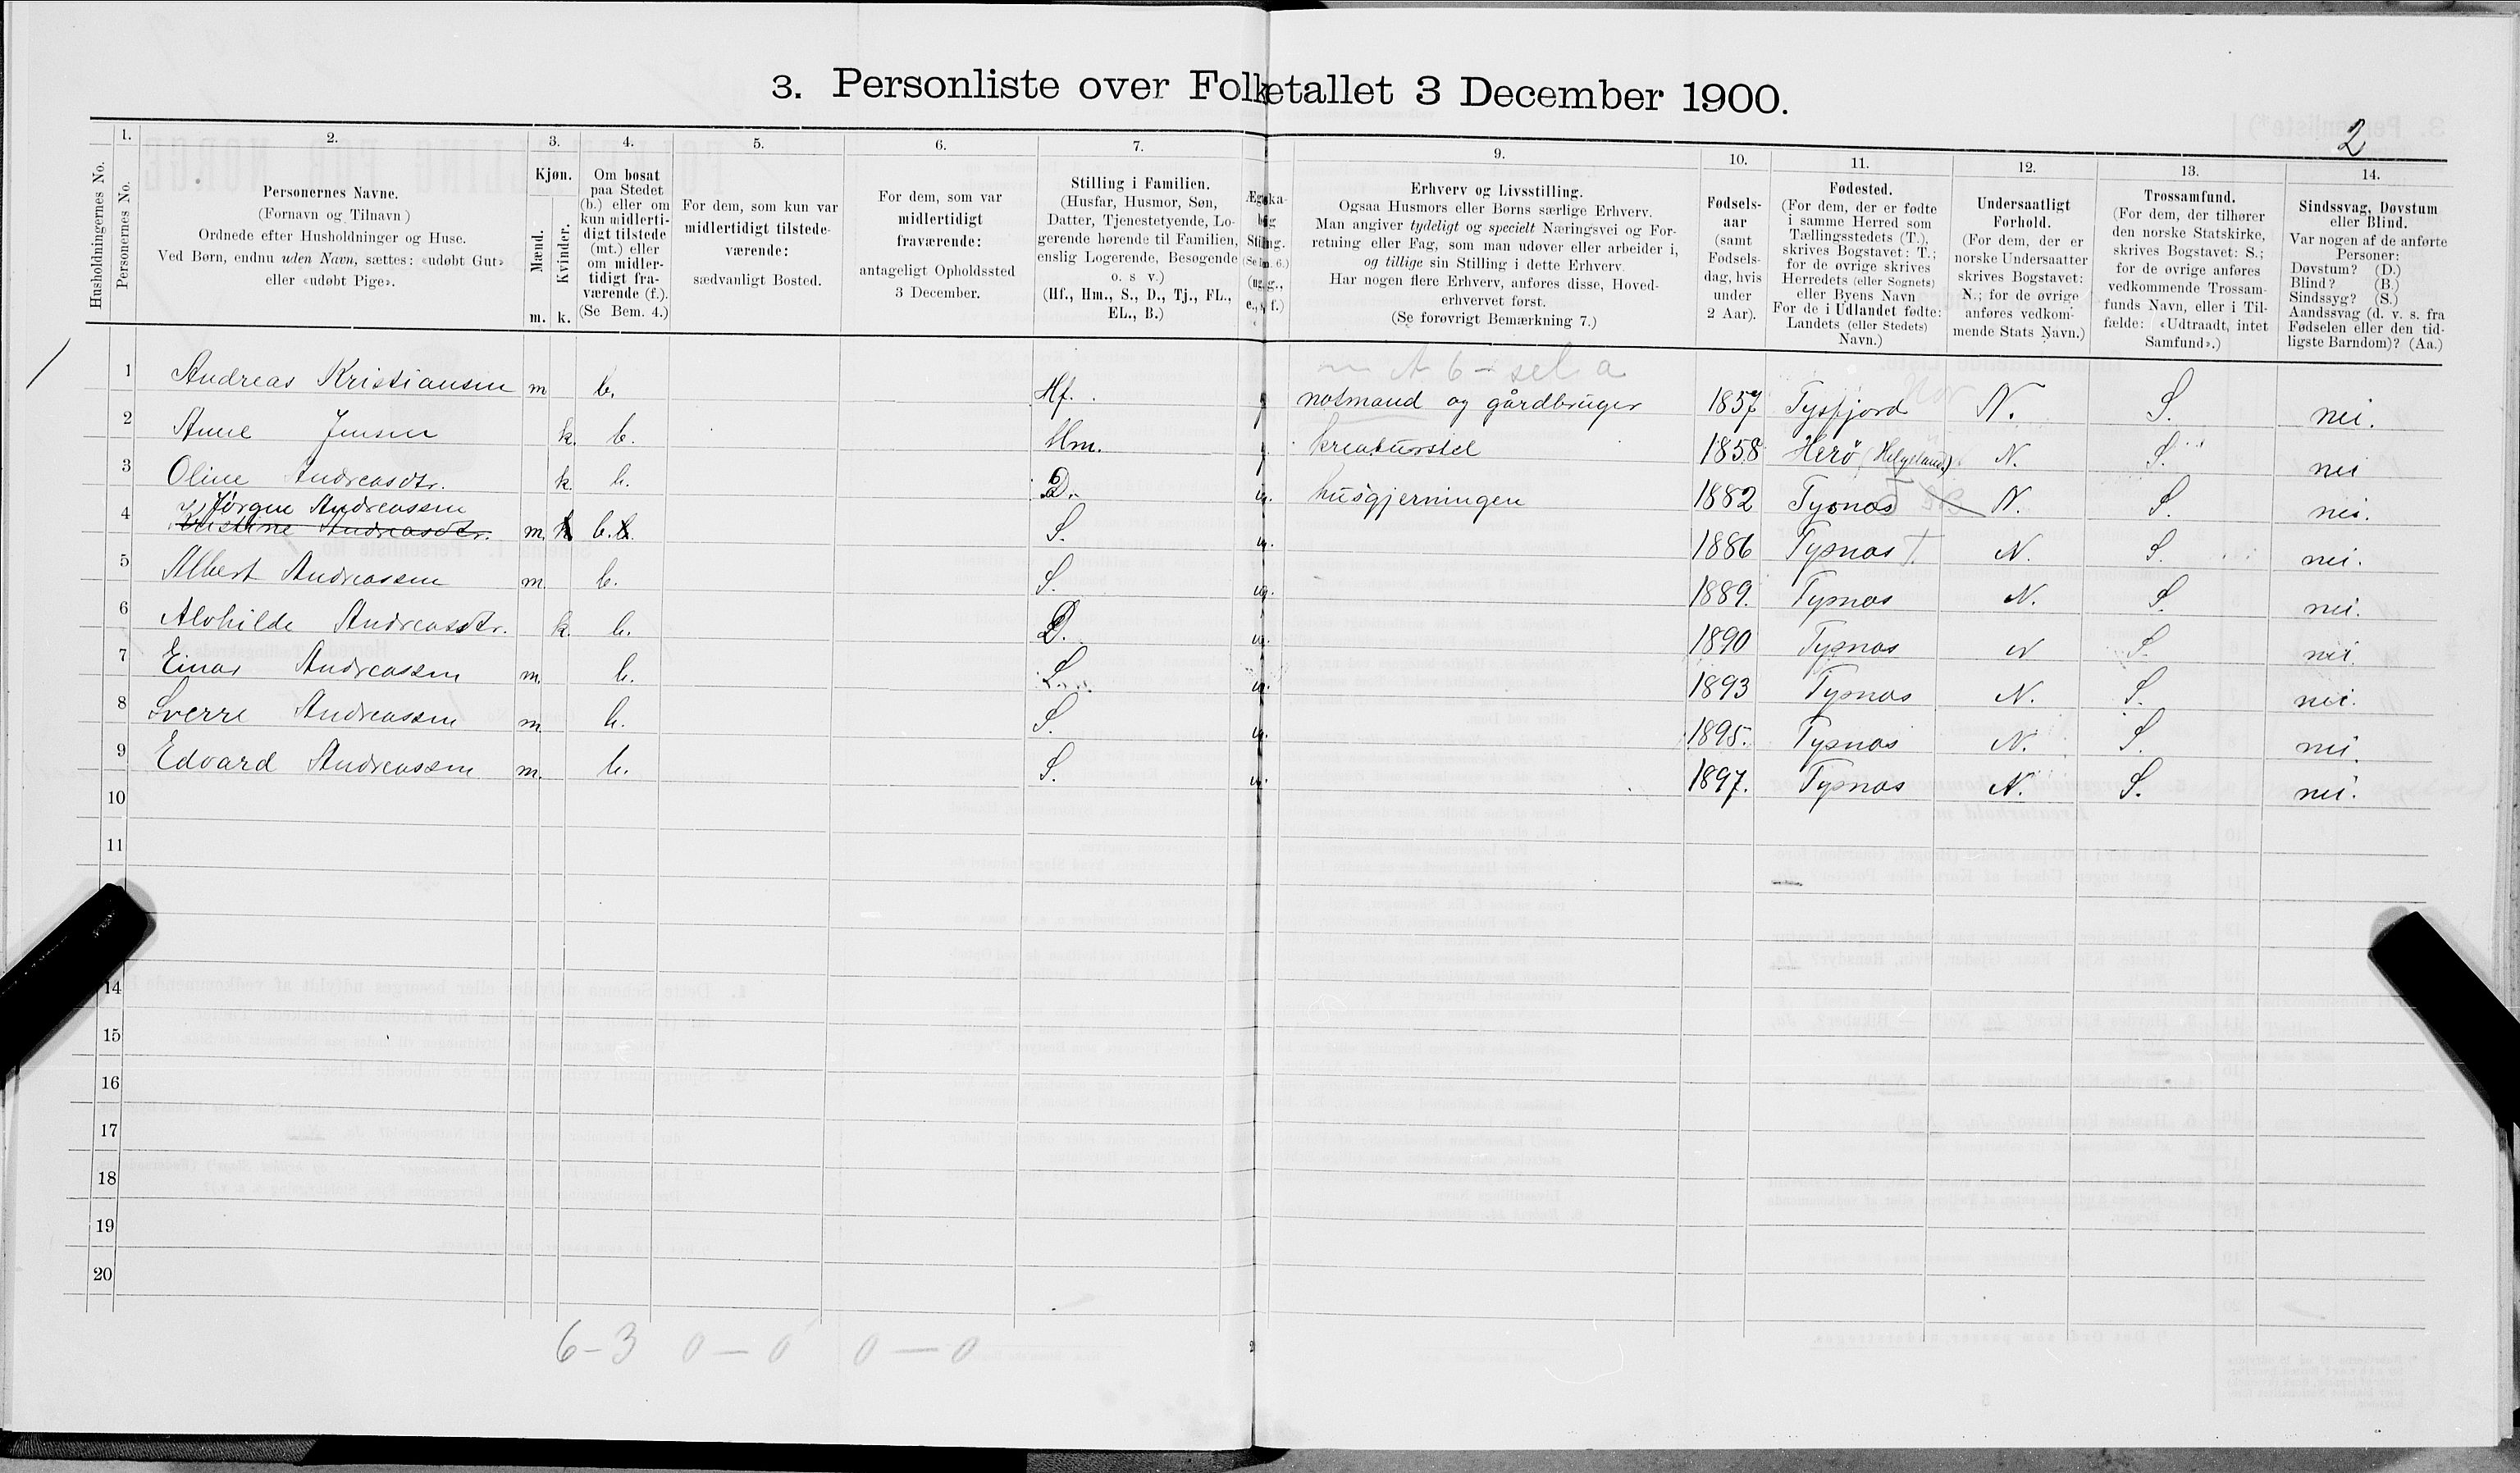 SAT, 1900 census for Hamarøy, 1900, p. 19